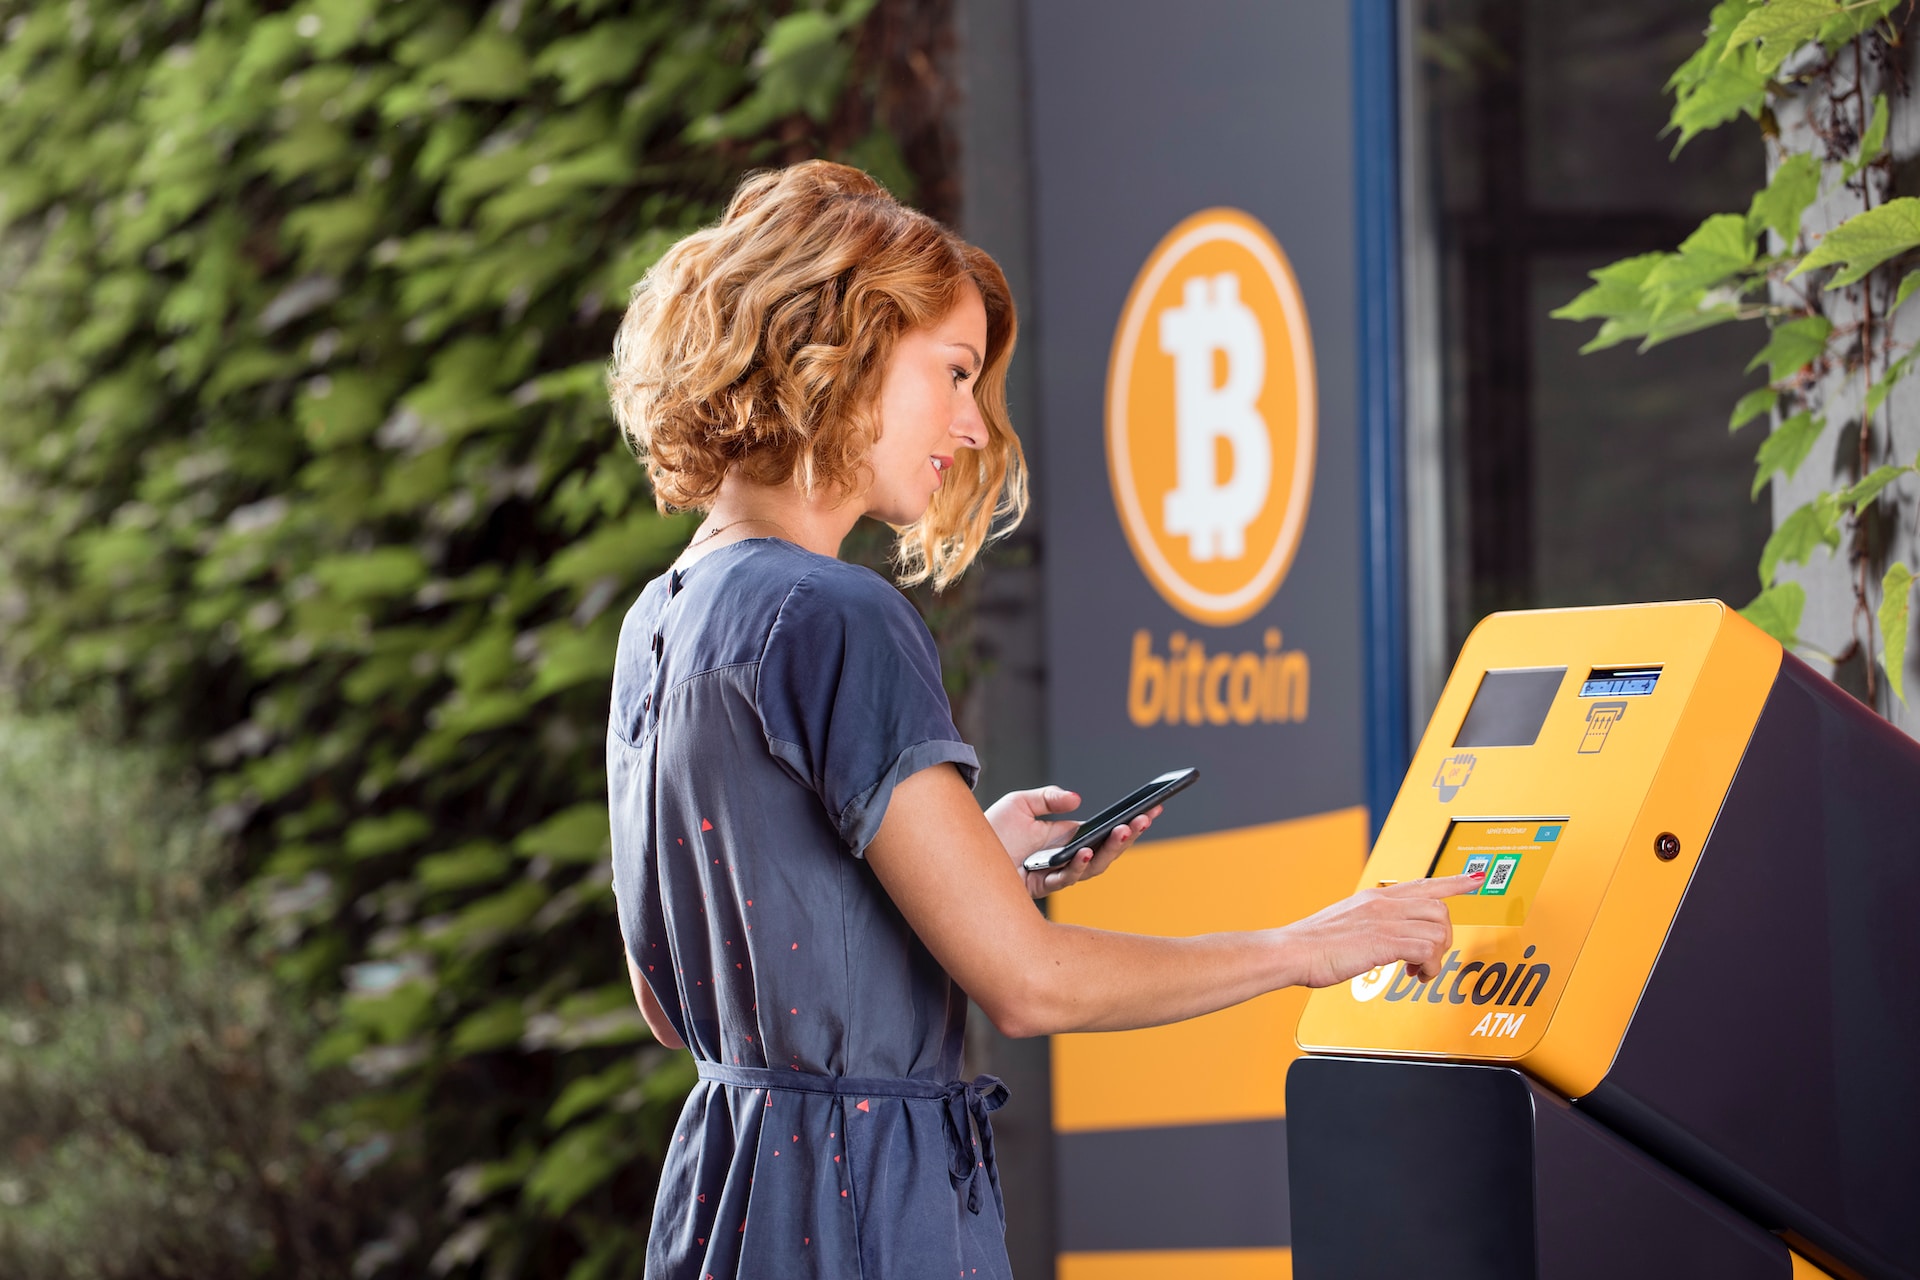 The Global Rise in Bitcoin ATM Usage